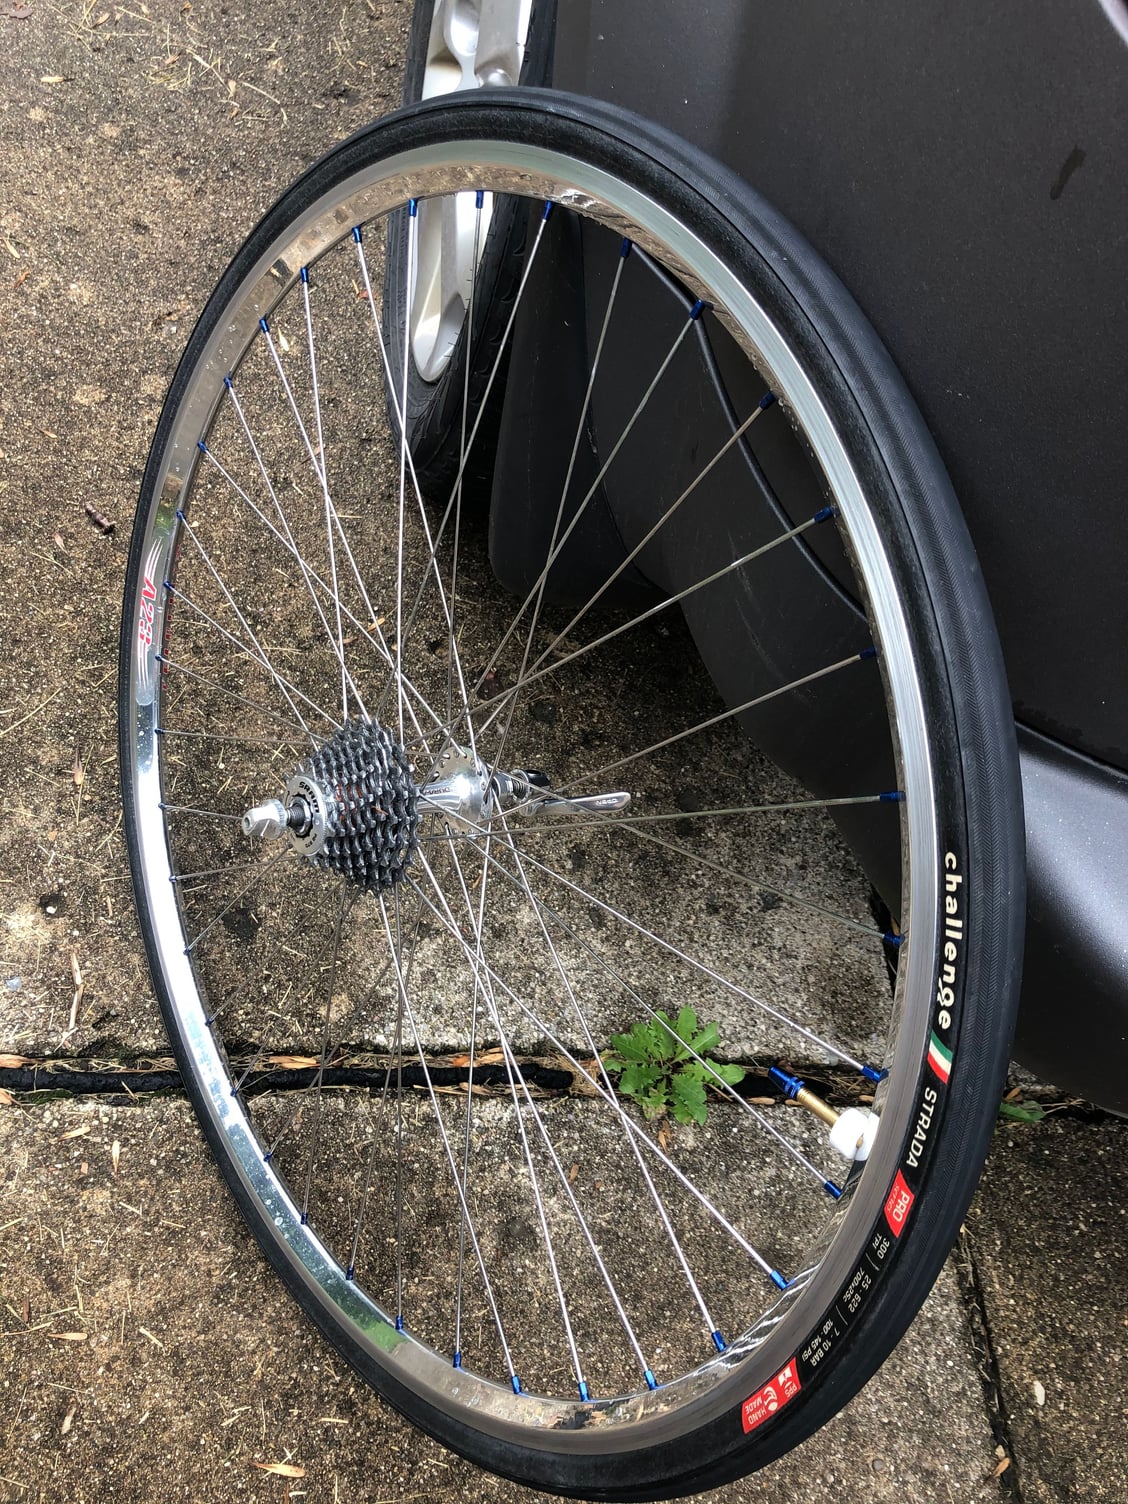 How to clean this aluminum rim? - Bike Forums